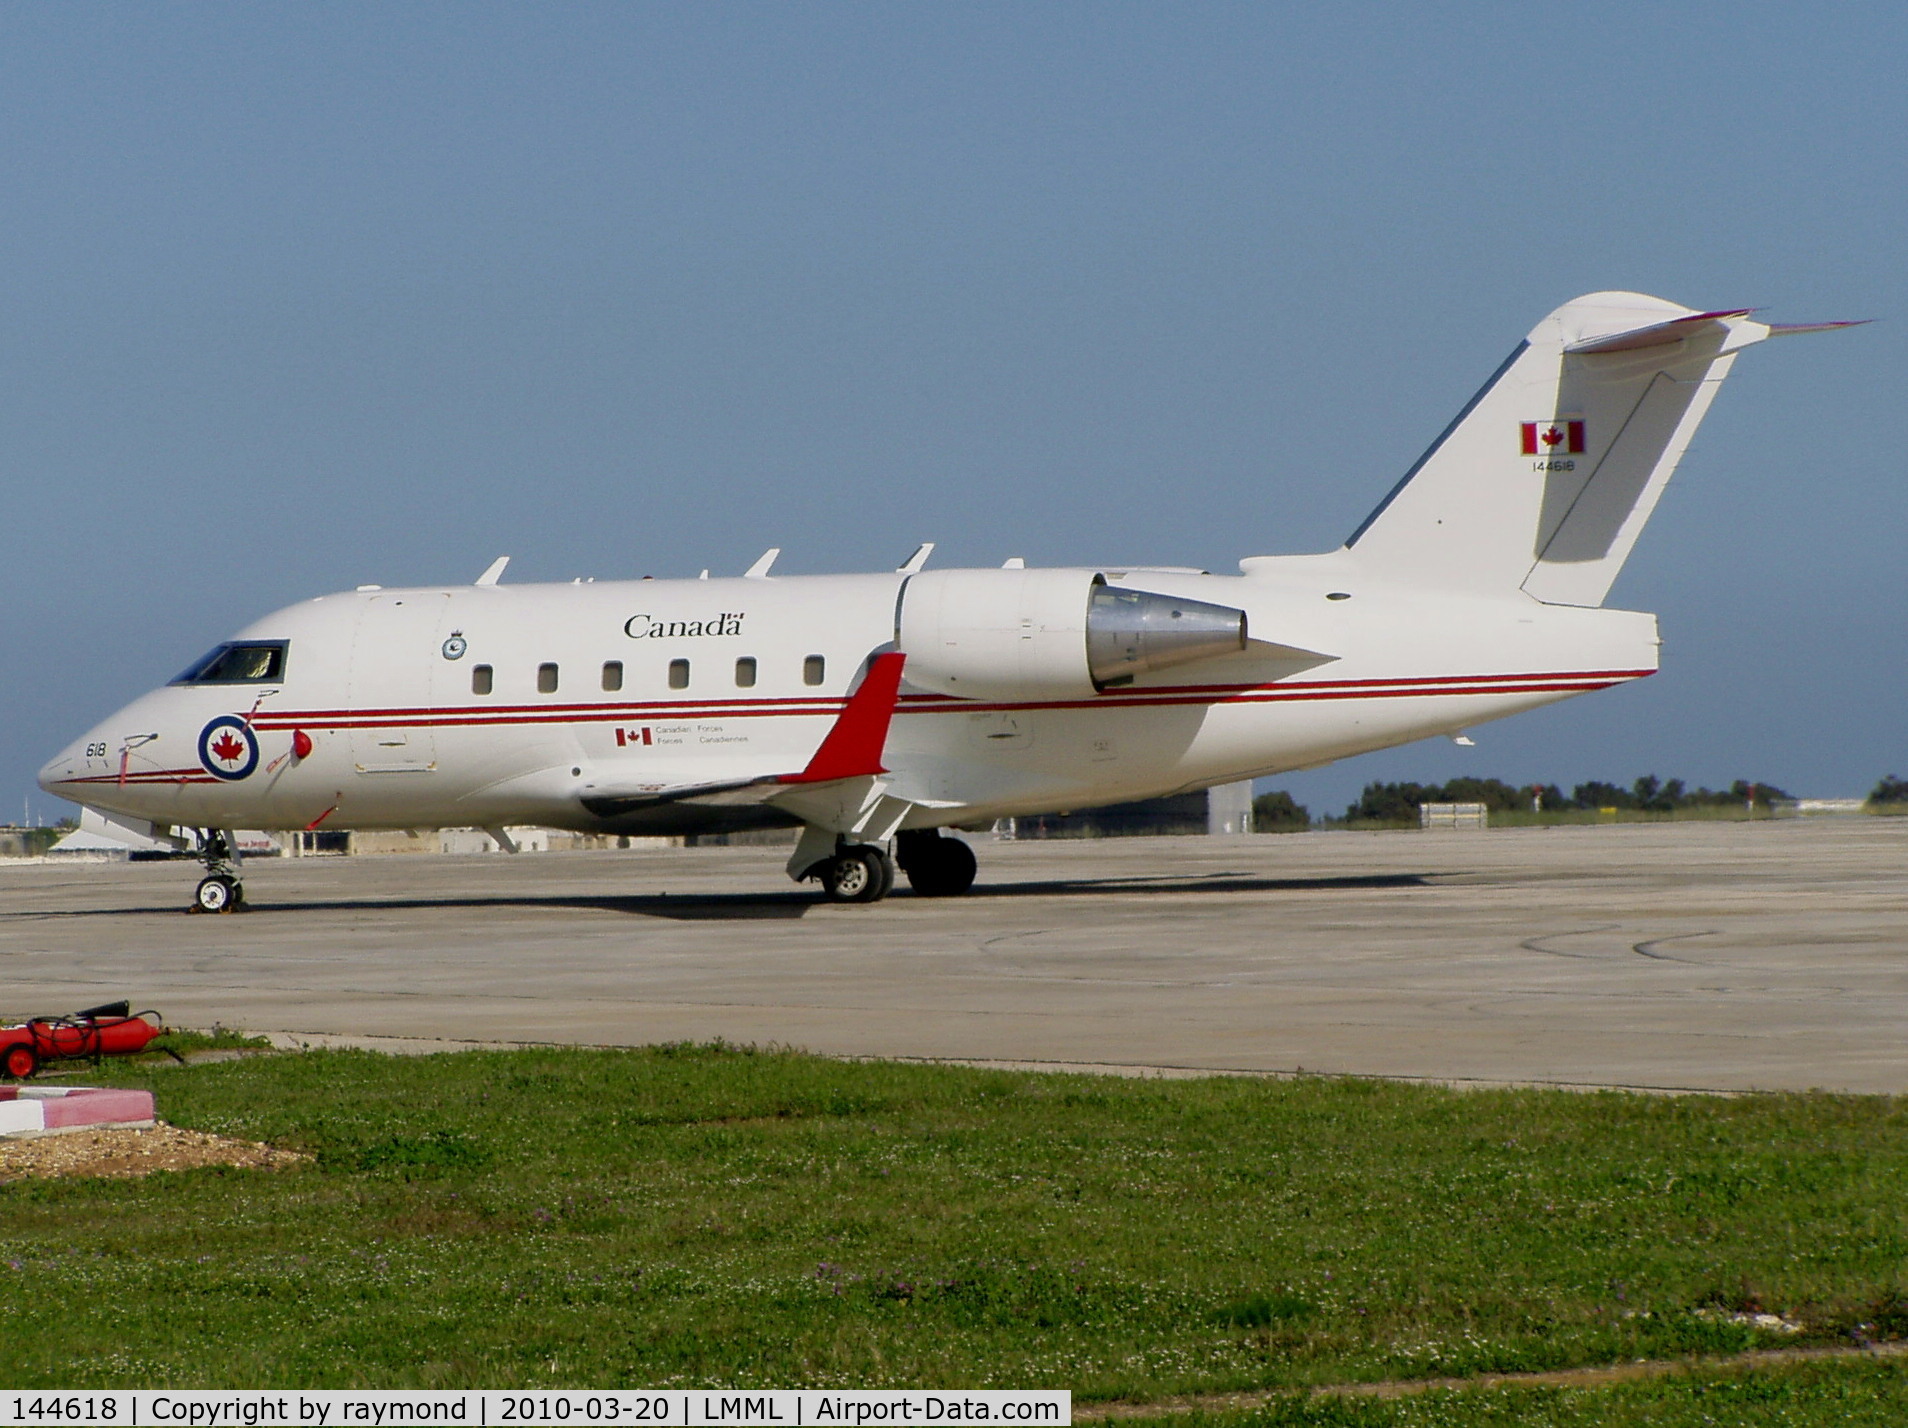 144618, 2002 Bombardier Challenger 604 (CL-600-2B16) C/N 5535, Canadair C144 144618 Canadian Armed Forces